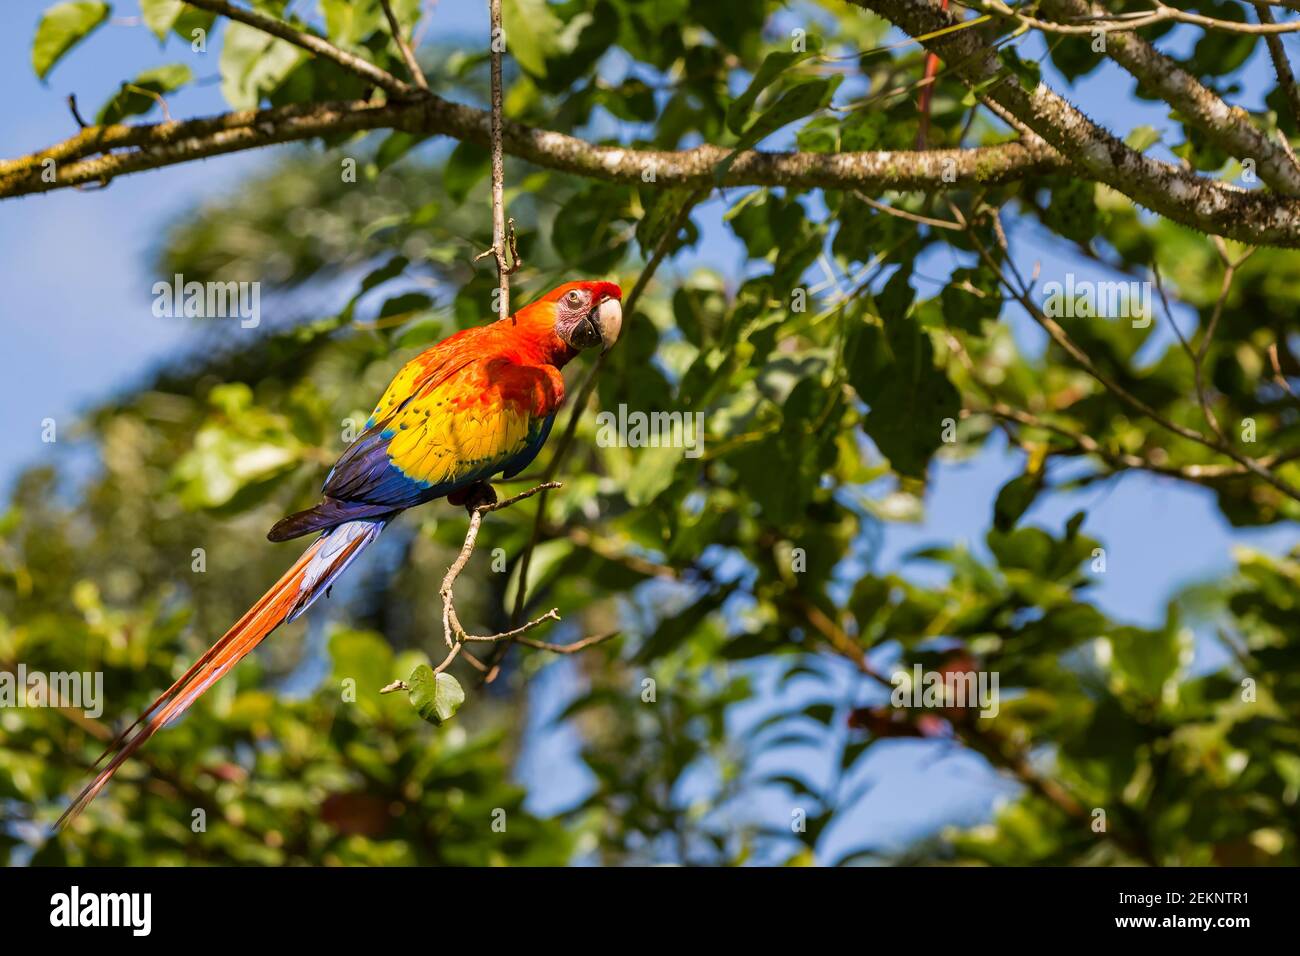 Multicolored adult parrot Scarlet Macaw (Ara macao), contrast with red, yellow and blue feathers, hanging from a branch, Caribbean Lowlands rainforest Stock Photo